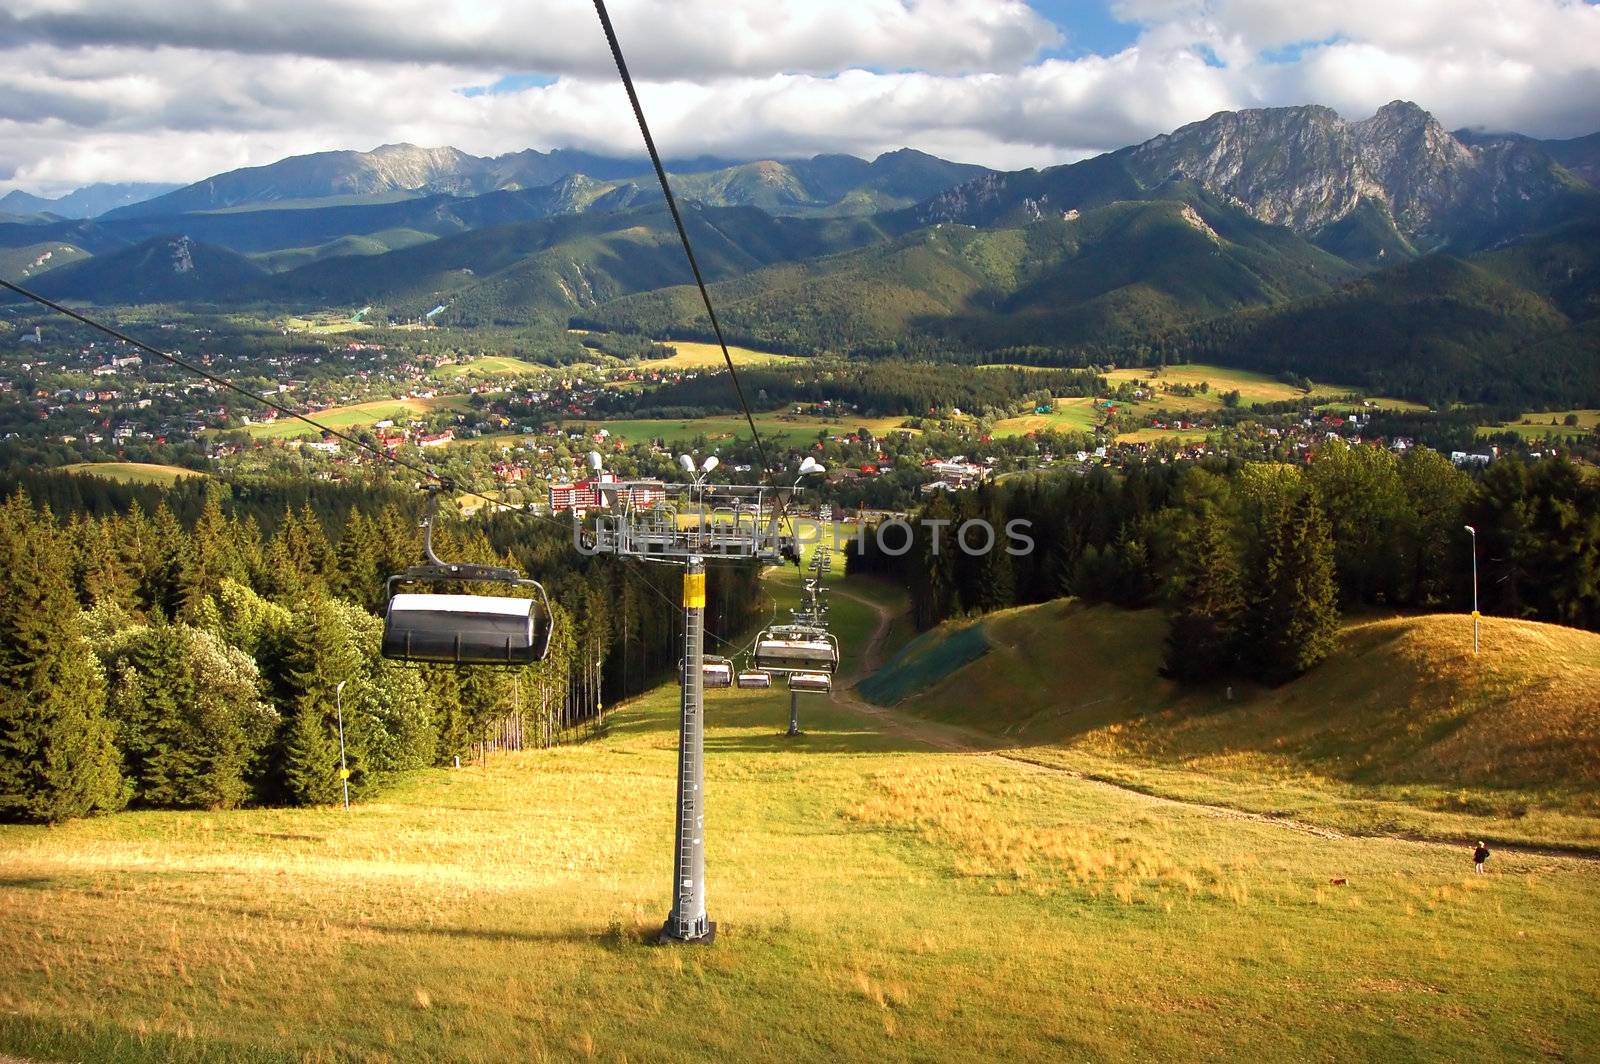 A chair-lift by photocreo